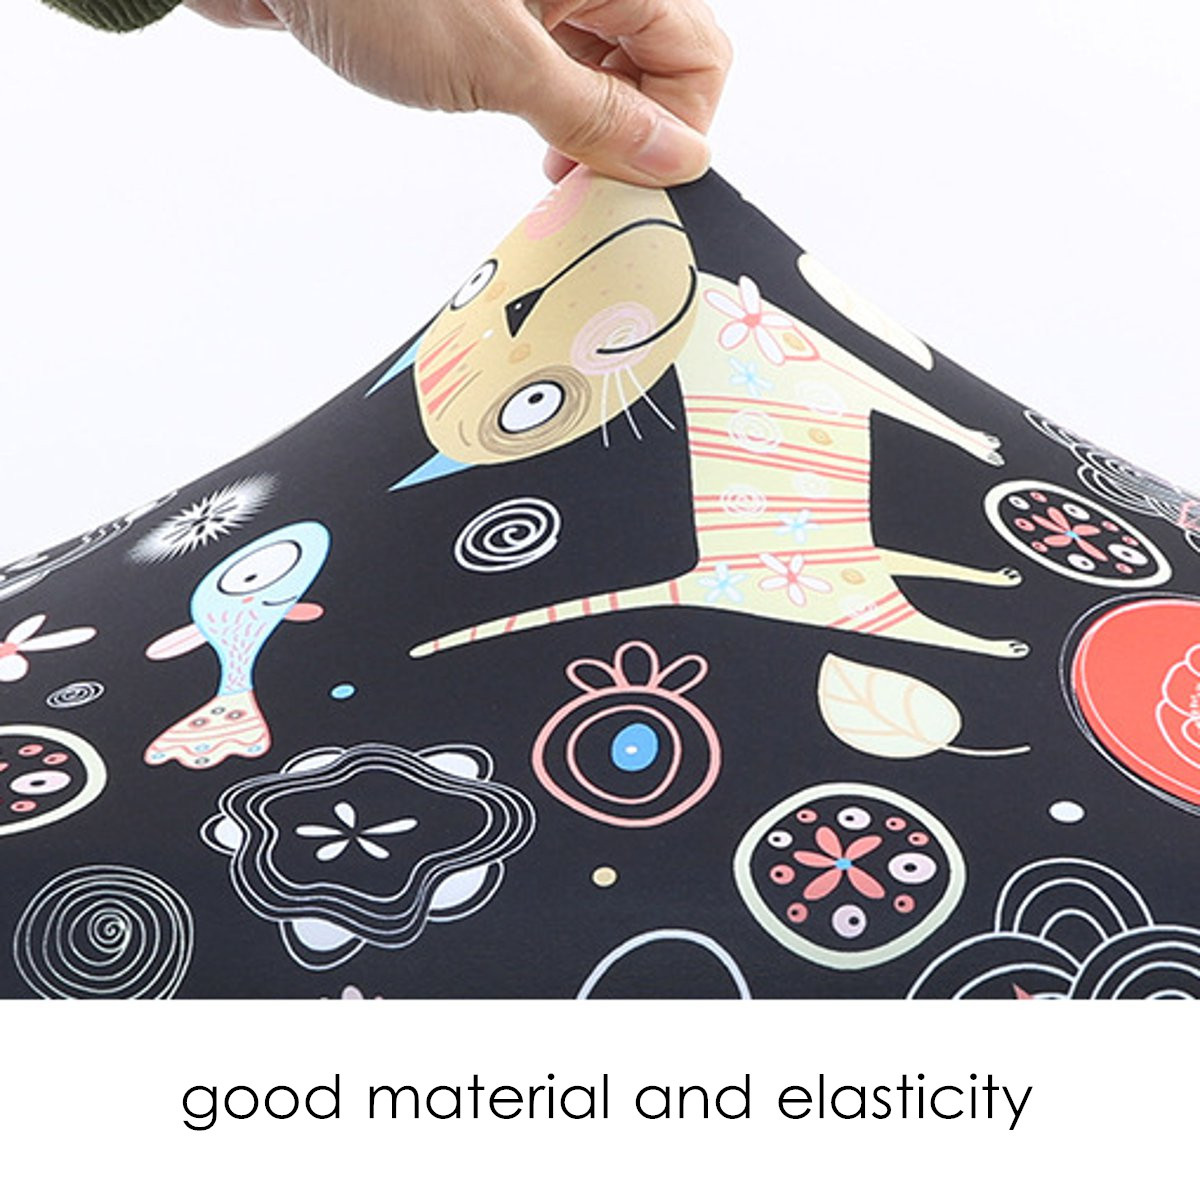 Multicolors-Elastic-Luggage-Cover-Travel-Suitcase-Protector-Dustproof-Protection-Case-Trolley-1465421-2